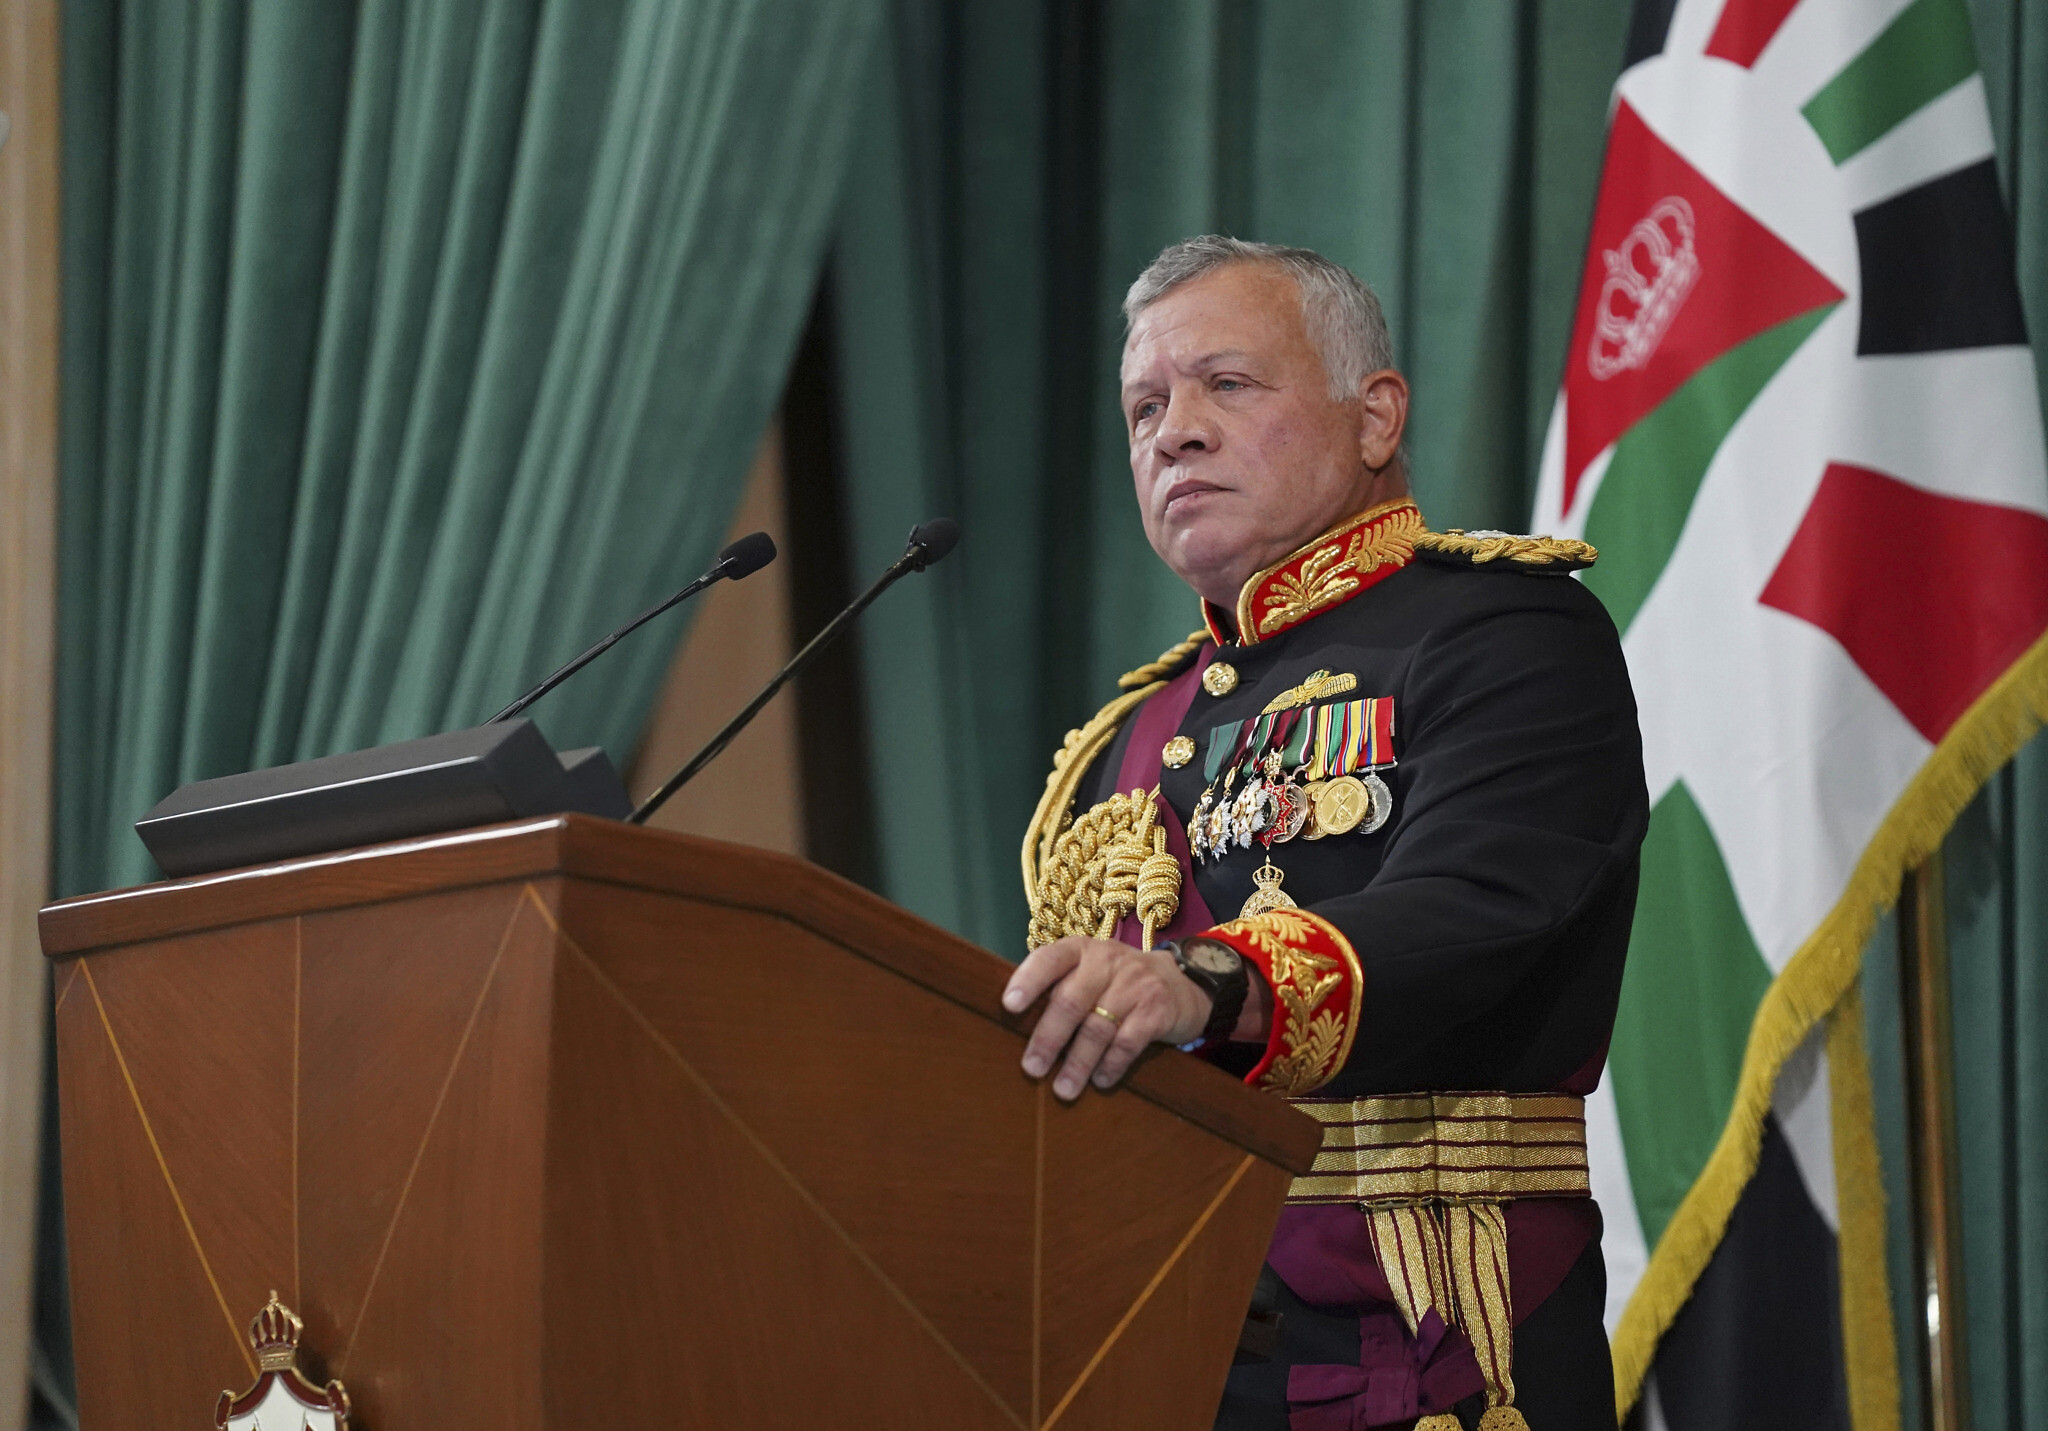 In this photo released by the Royal Hashemite Court, Jordan's King Abdullah II gives a speech during the inauguration of the 19th Parliament’s non-ordinary session, in Amman Jordan, Thursday, Dec. 10, 2020. (Yousef Allan/The Royal Hashemite Court via AP)